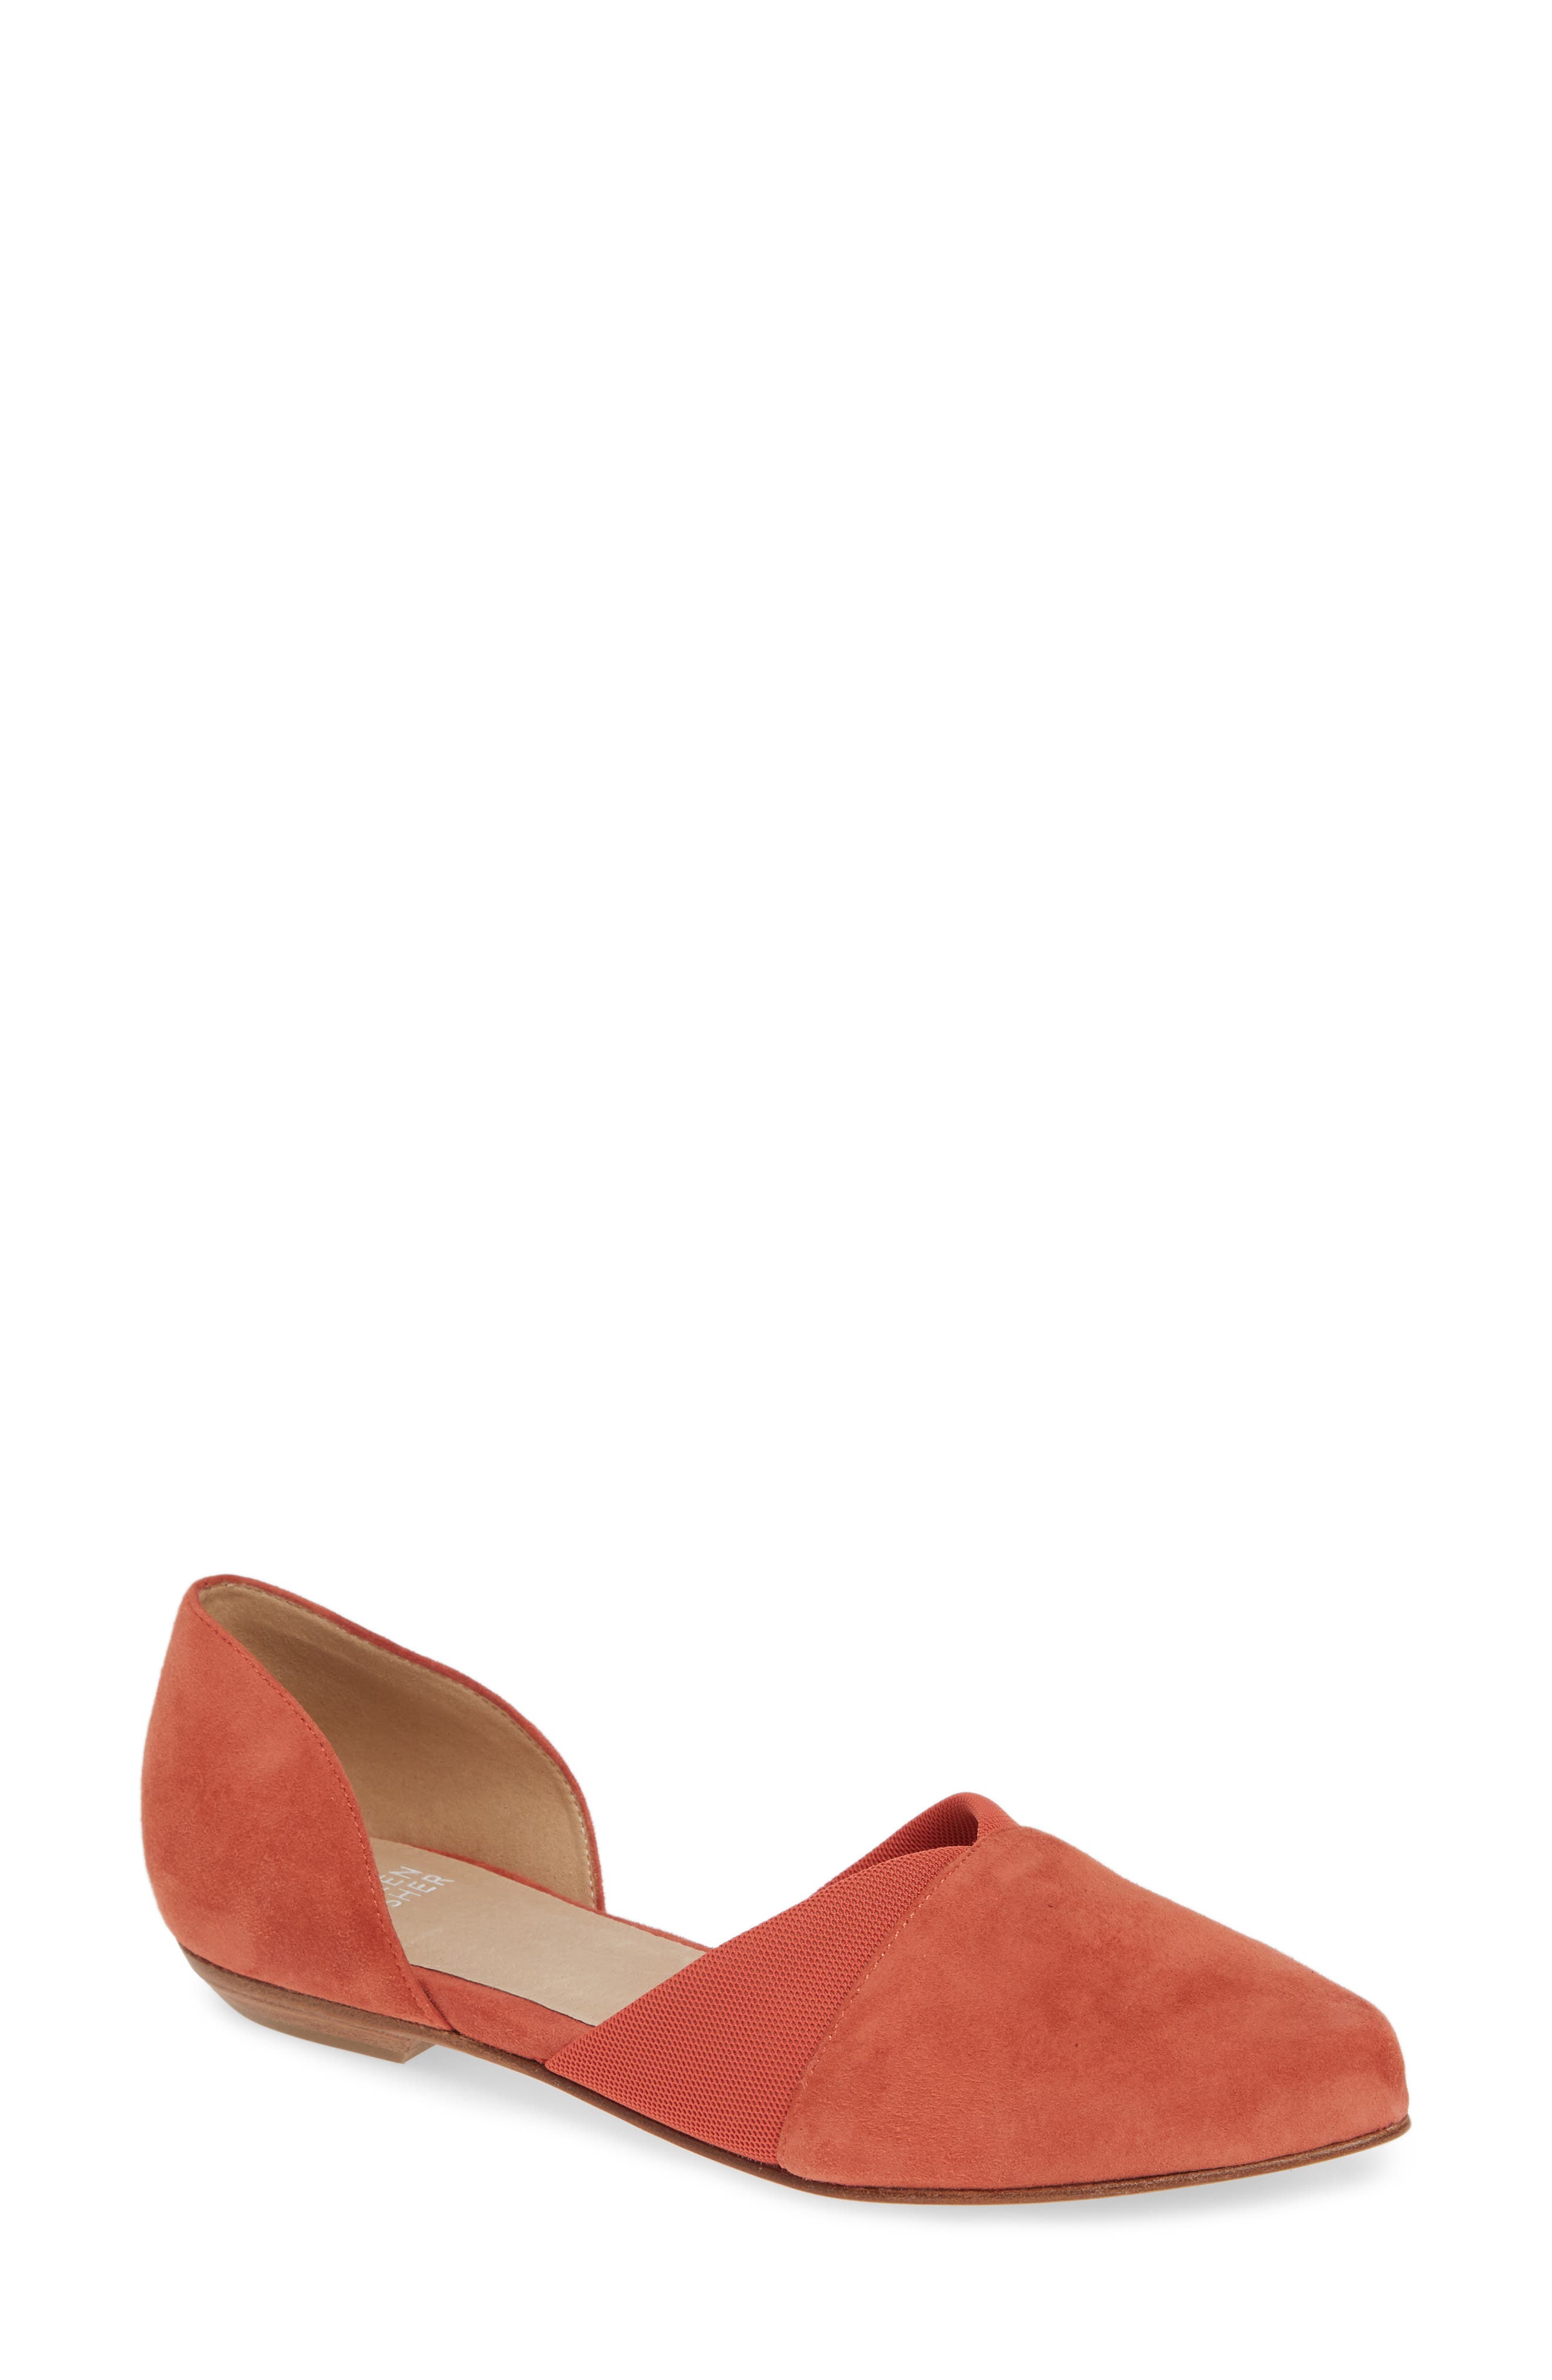 eileen fisher flat shoes